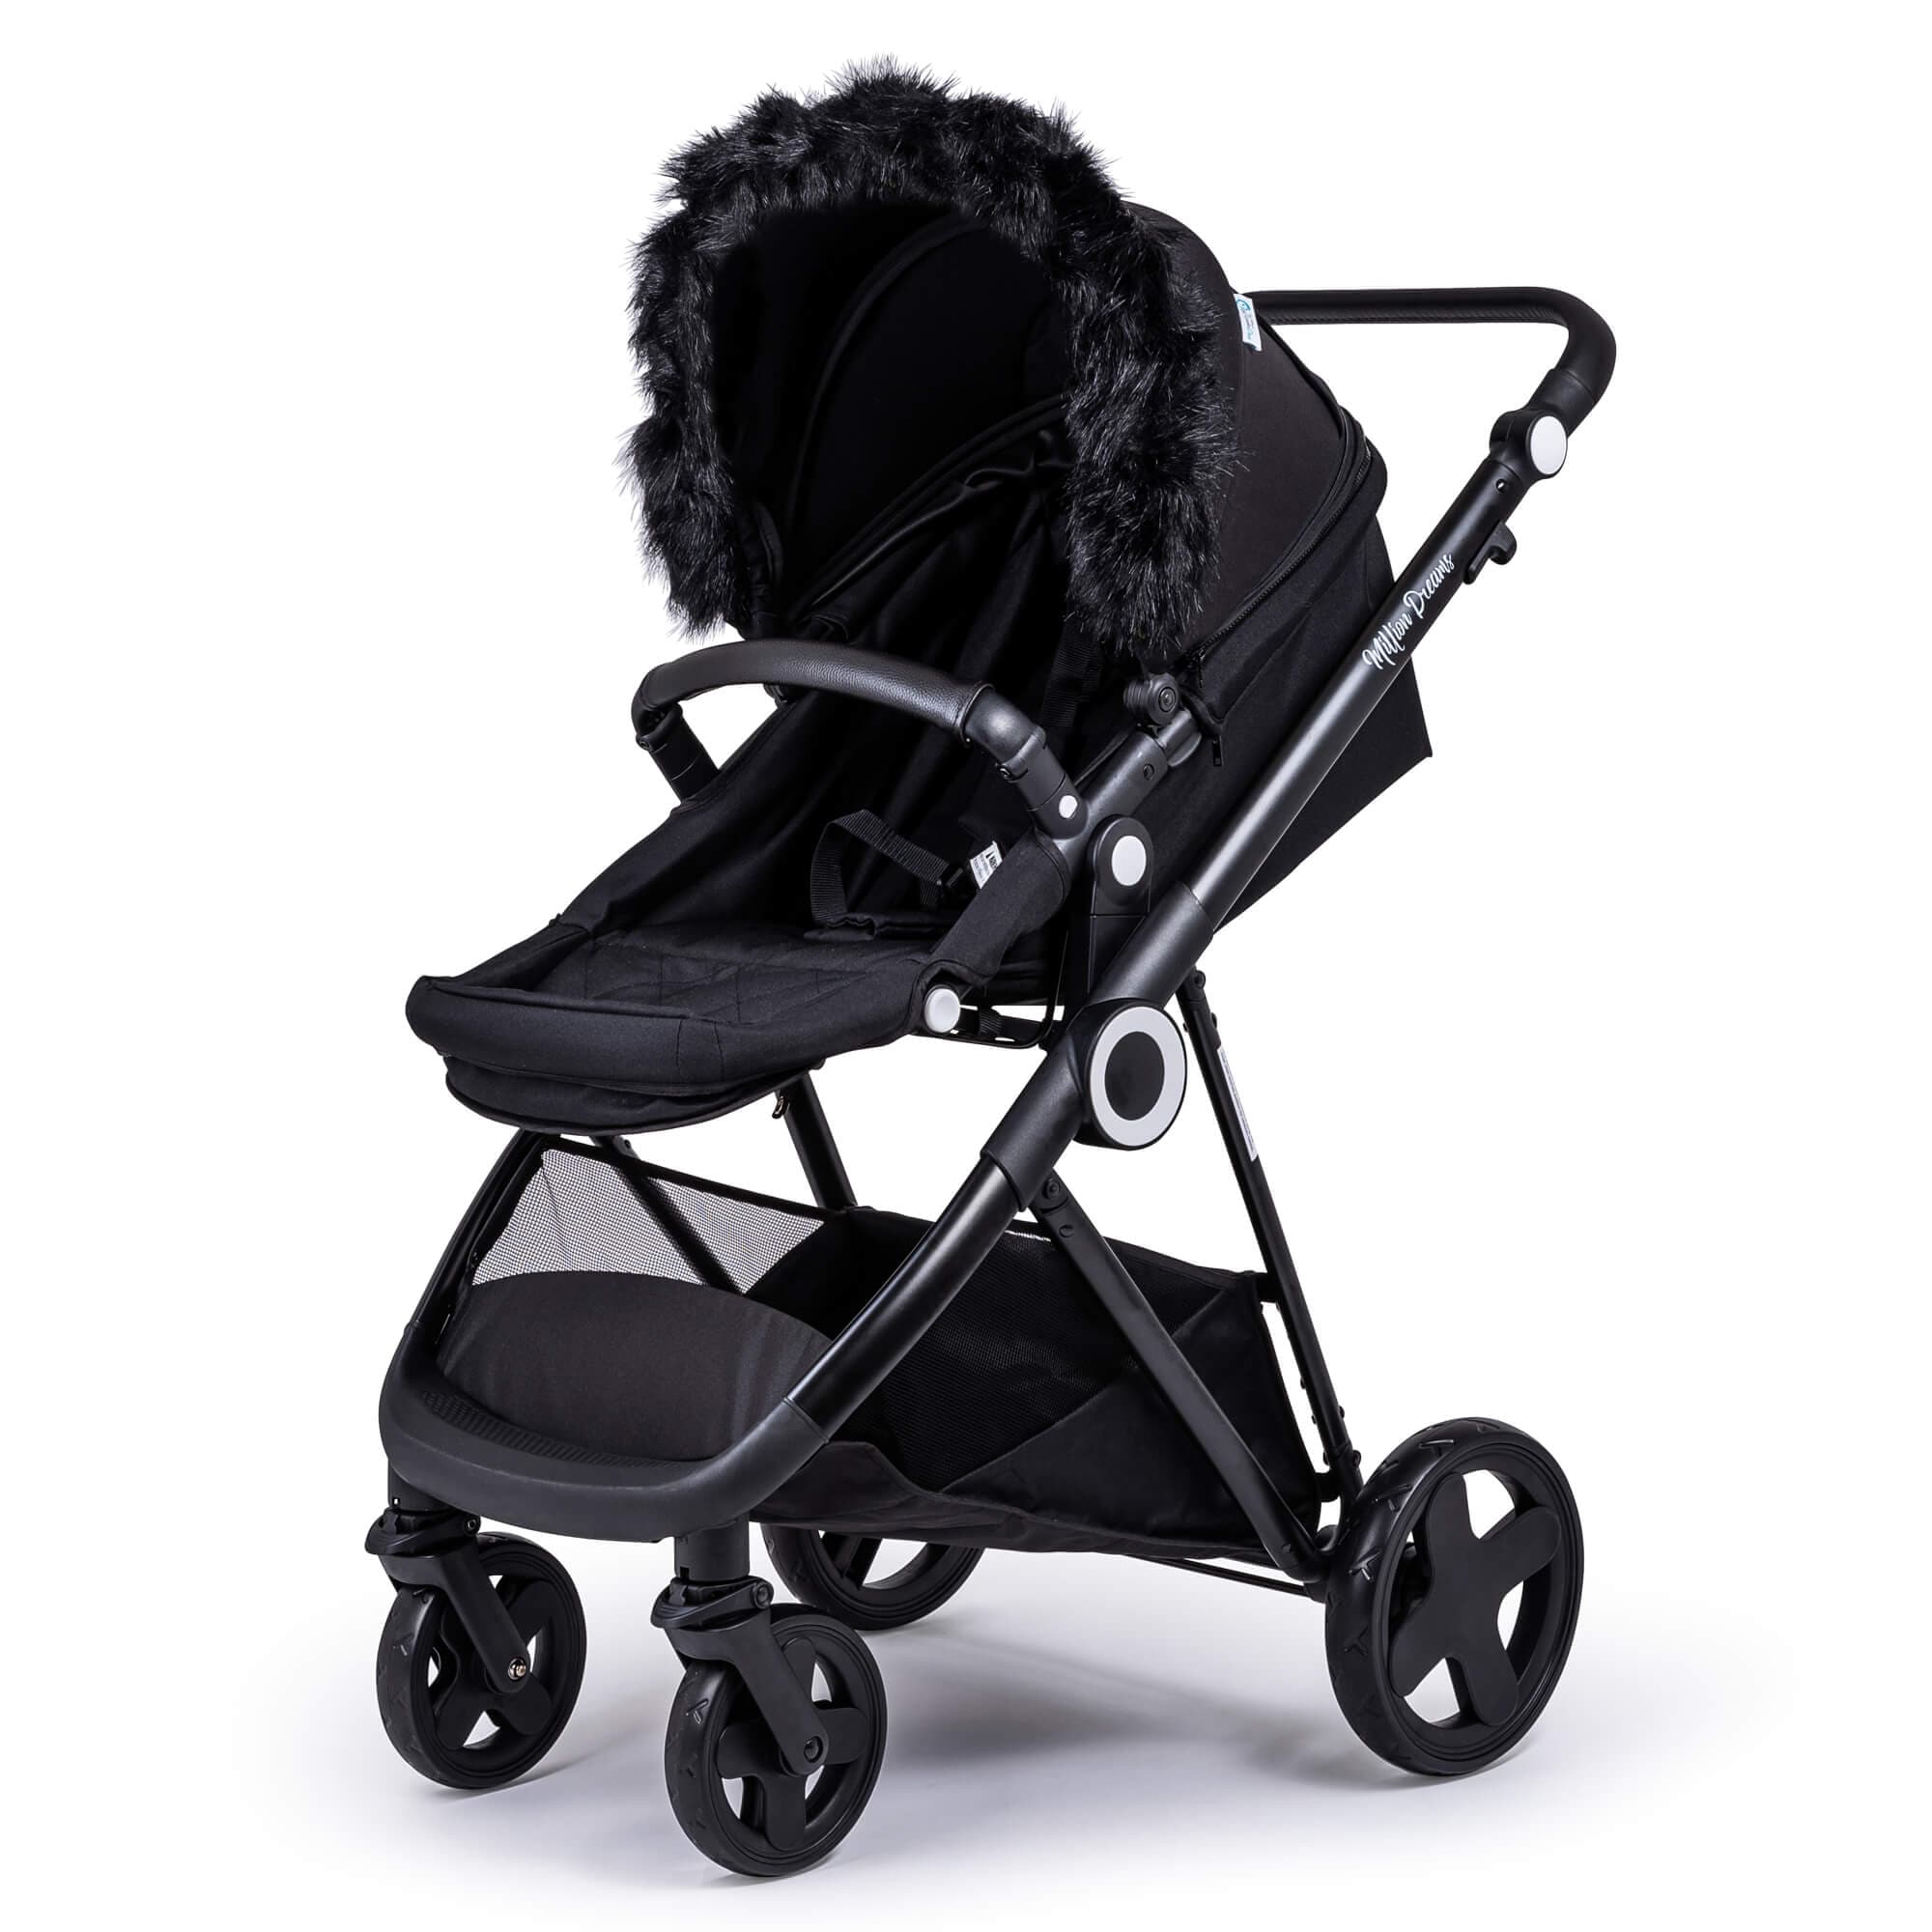 Pram Fur Hood Trim Attachment for Pushchair Compatible with My Babiie - Black / Fits All Models | For Your Little One